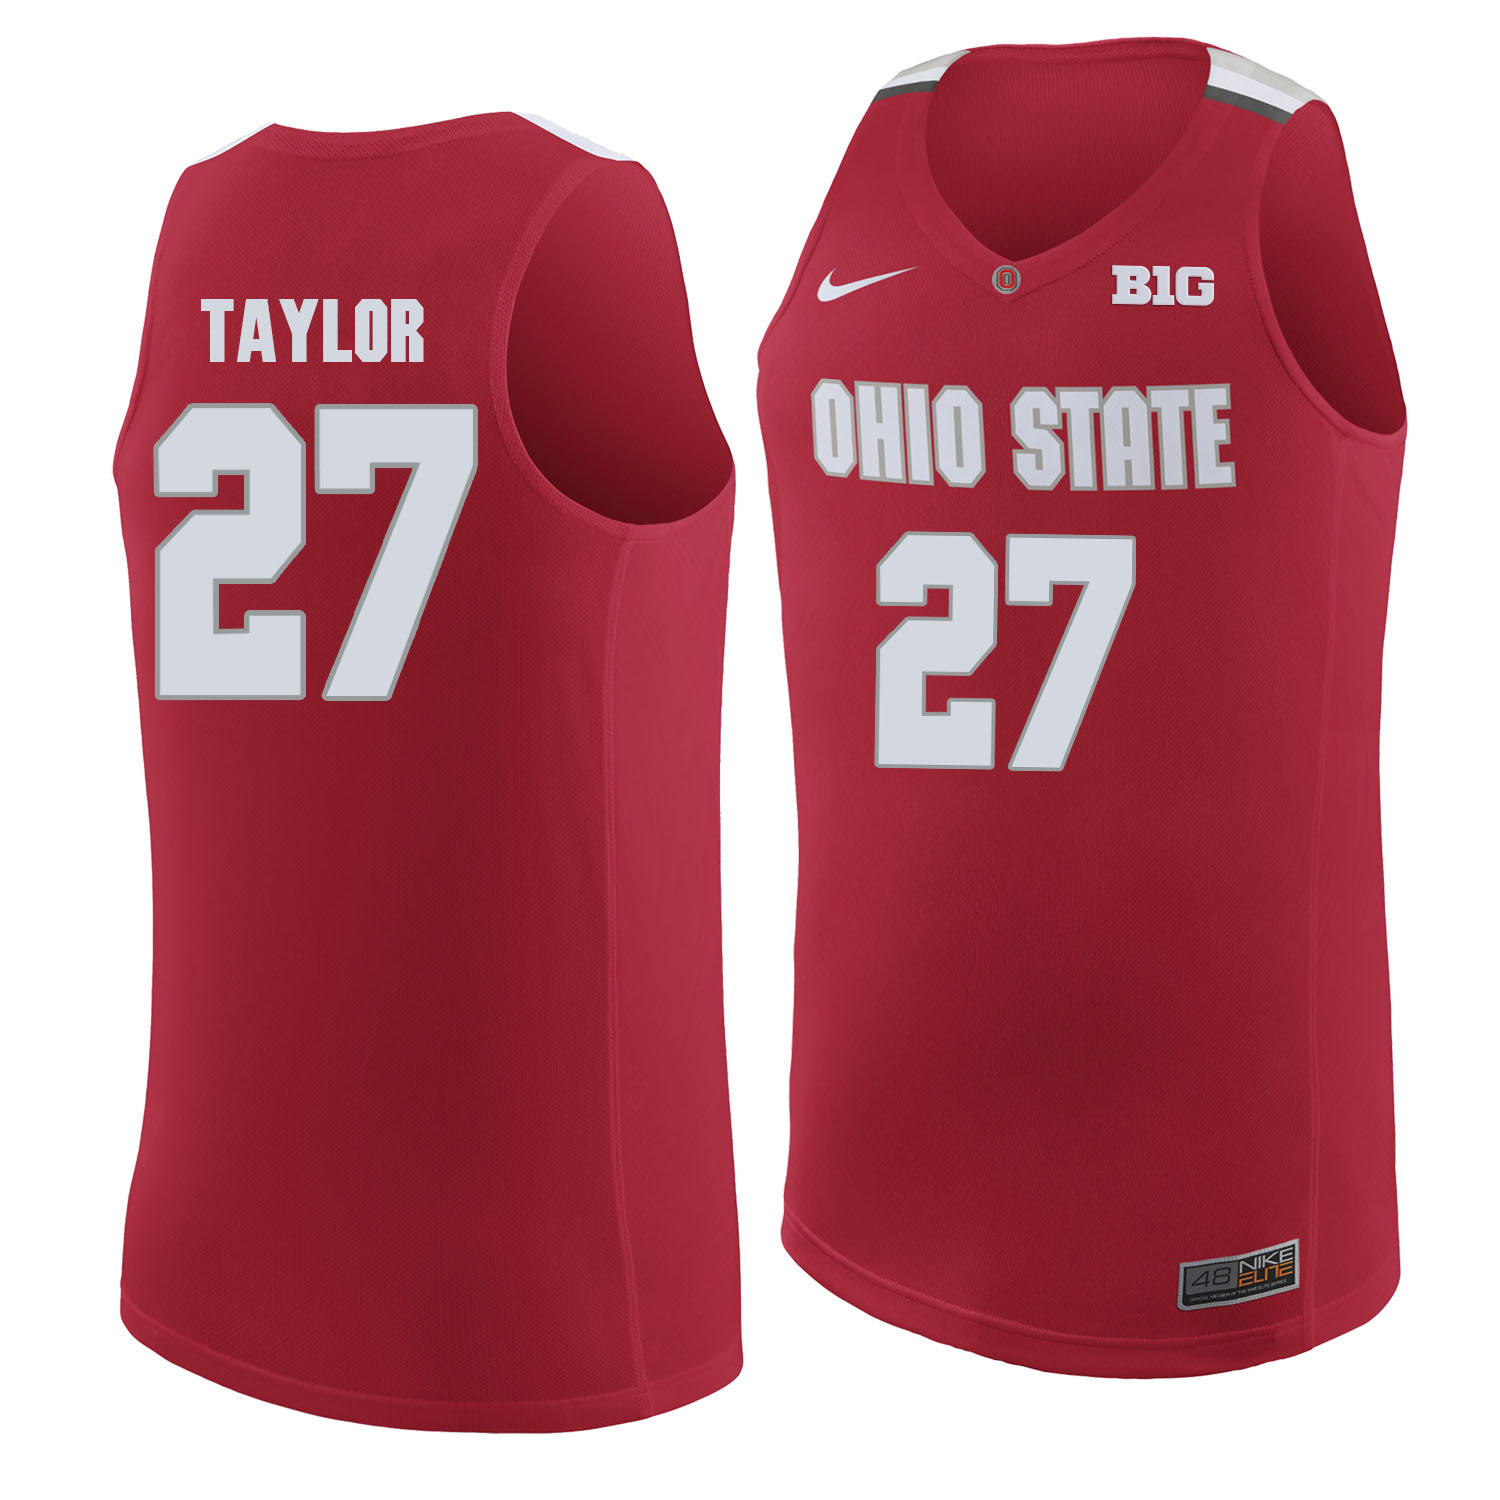 Ohio State Buckeyes 27 Fred Taylor Red College Basketball Jersey